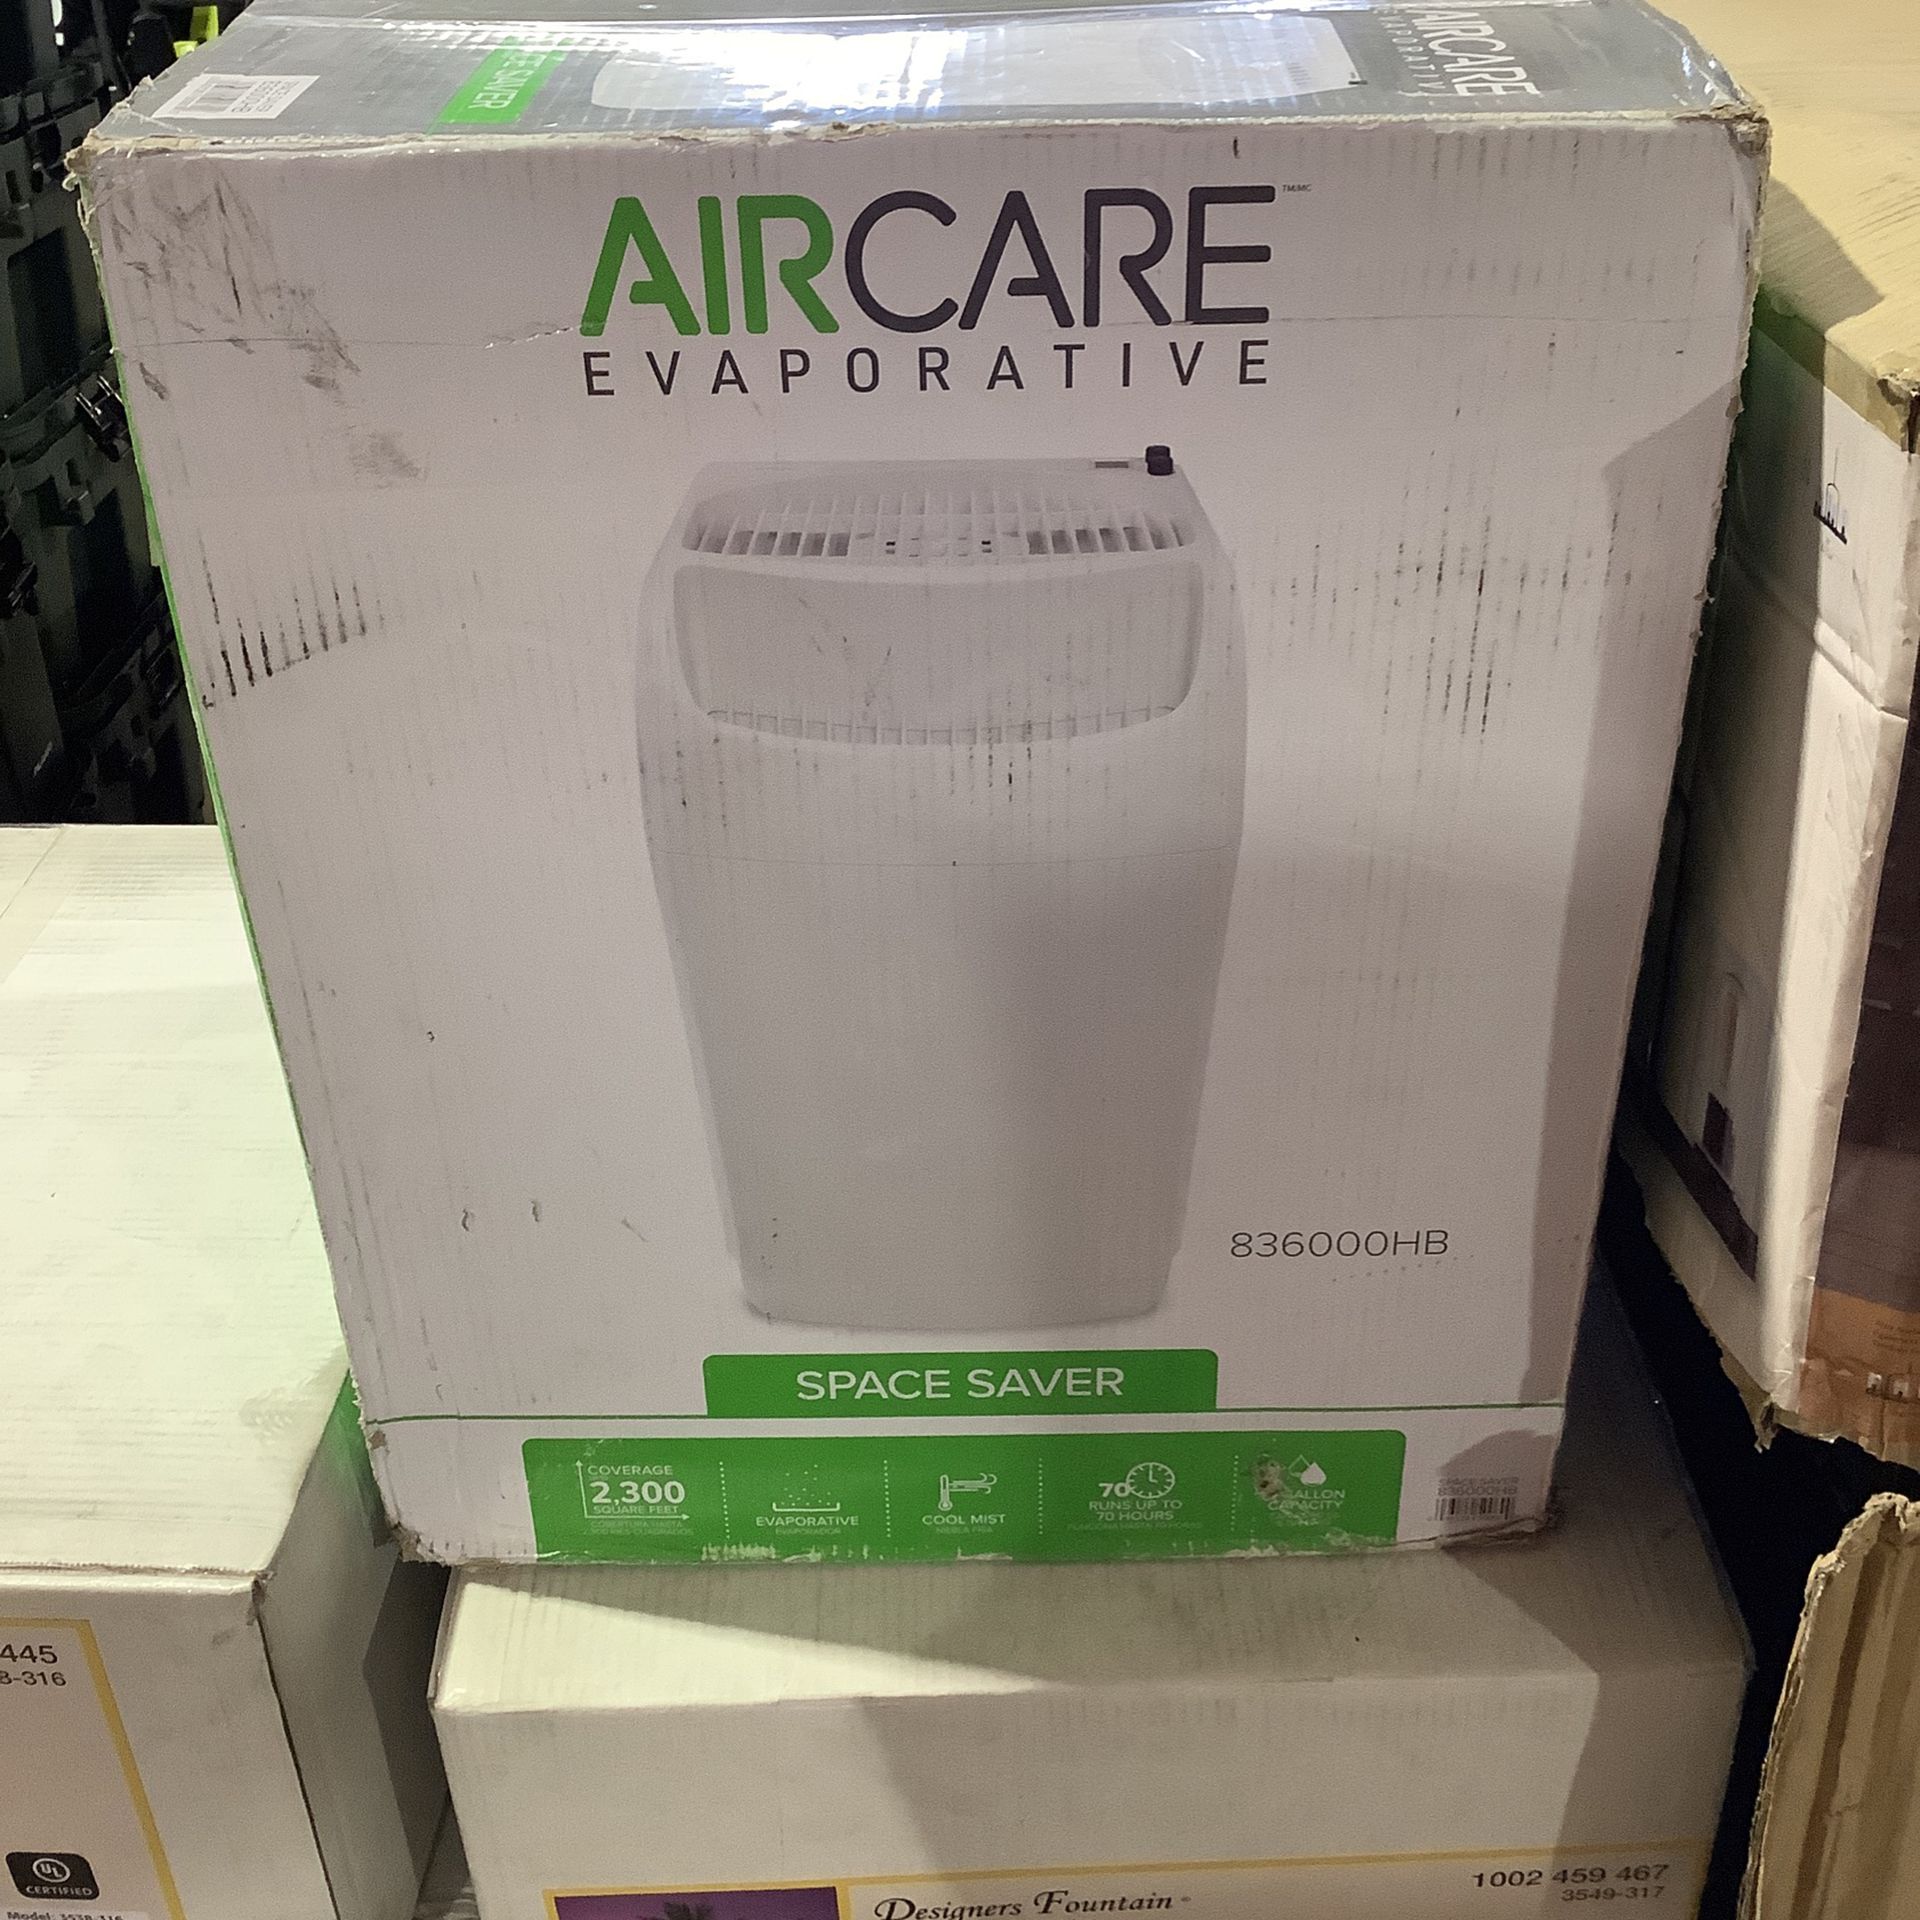 AIRCARE 6 Gal. Evaporative Humidifier for 2300 sq. ft.